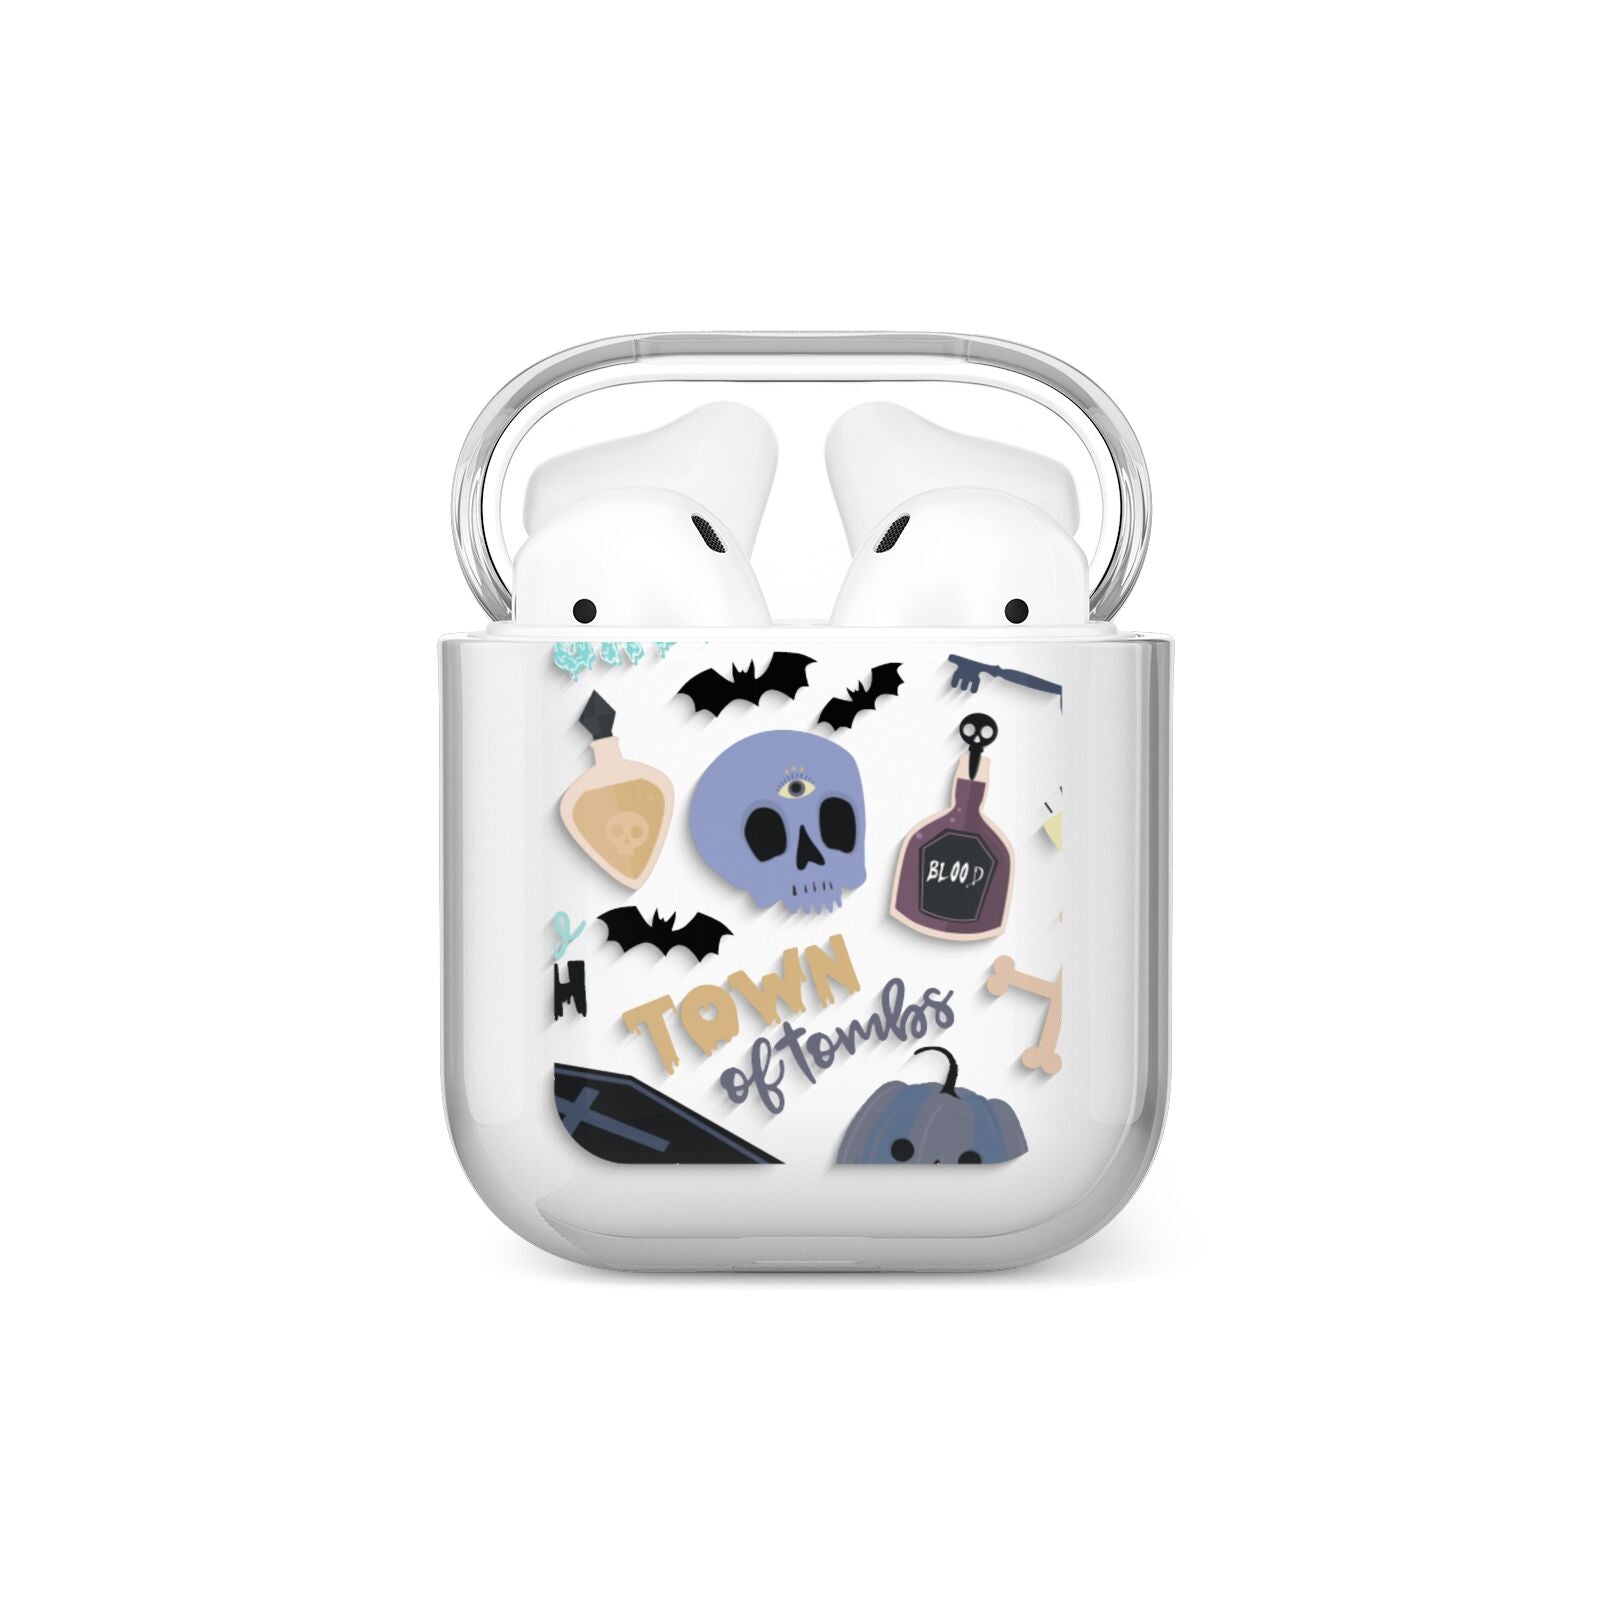 Spooky Blue Illustrations and Catchphrases AirPods Case